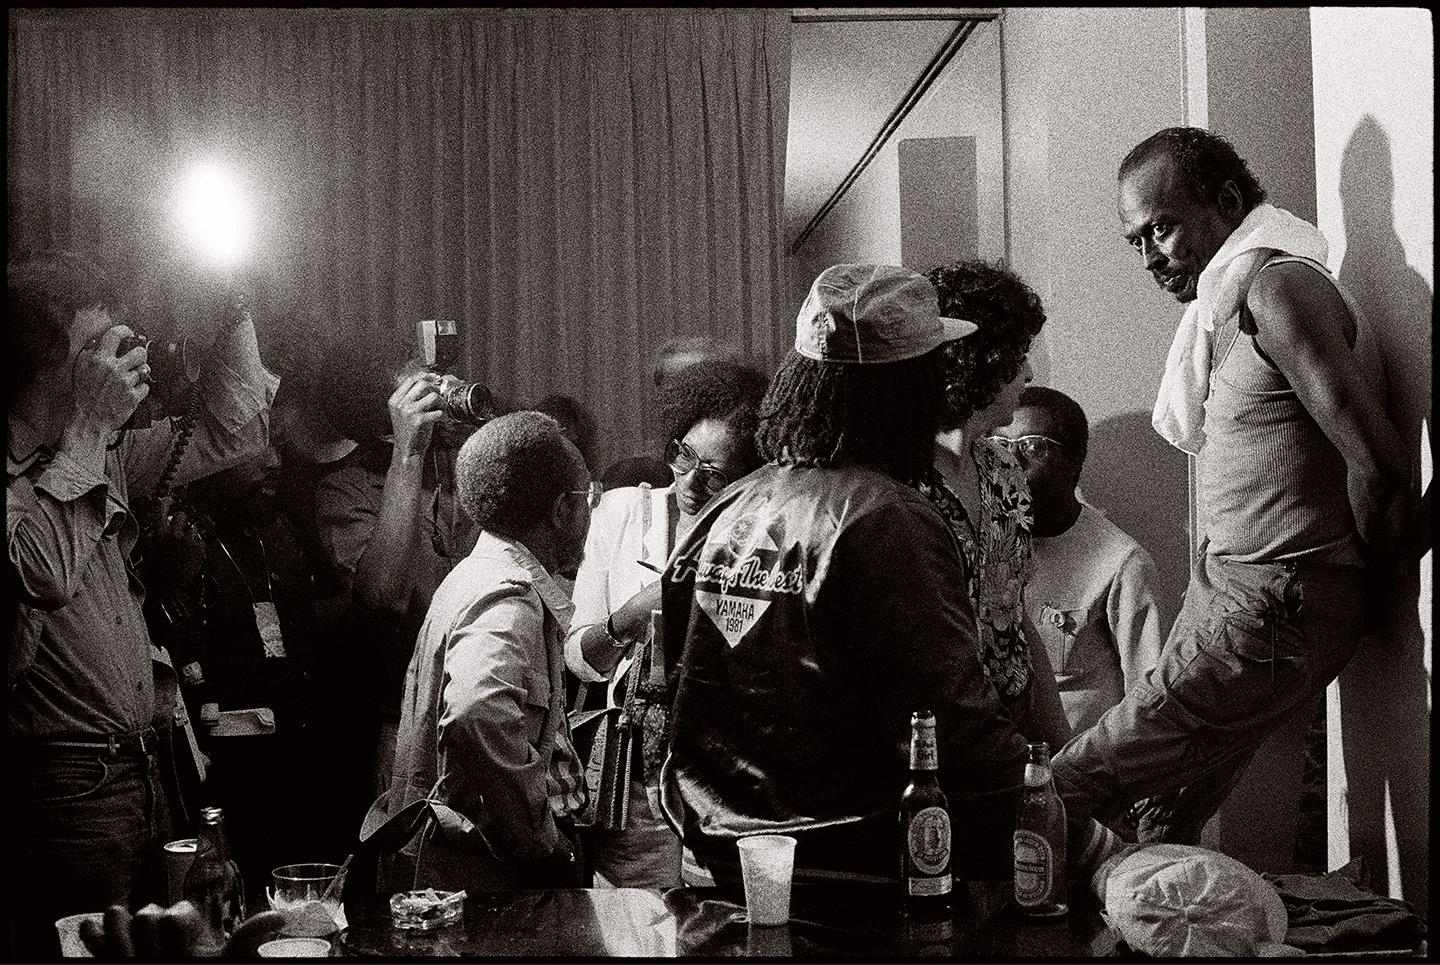 'Miles in the Green Room' by American photographer Frank Stewart, 1981. Pigment print, 28 x 40 inches. Edition 5 of 15, Recent Print, signed lower right corner. This photograph features Miles Davis at Avery Fisher Hall during the Miles Davis